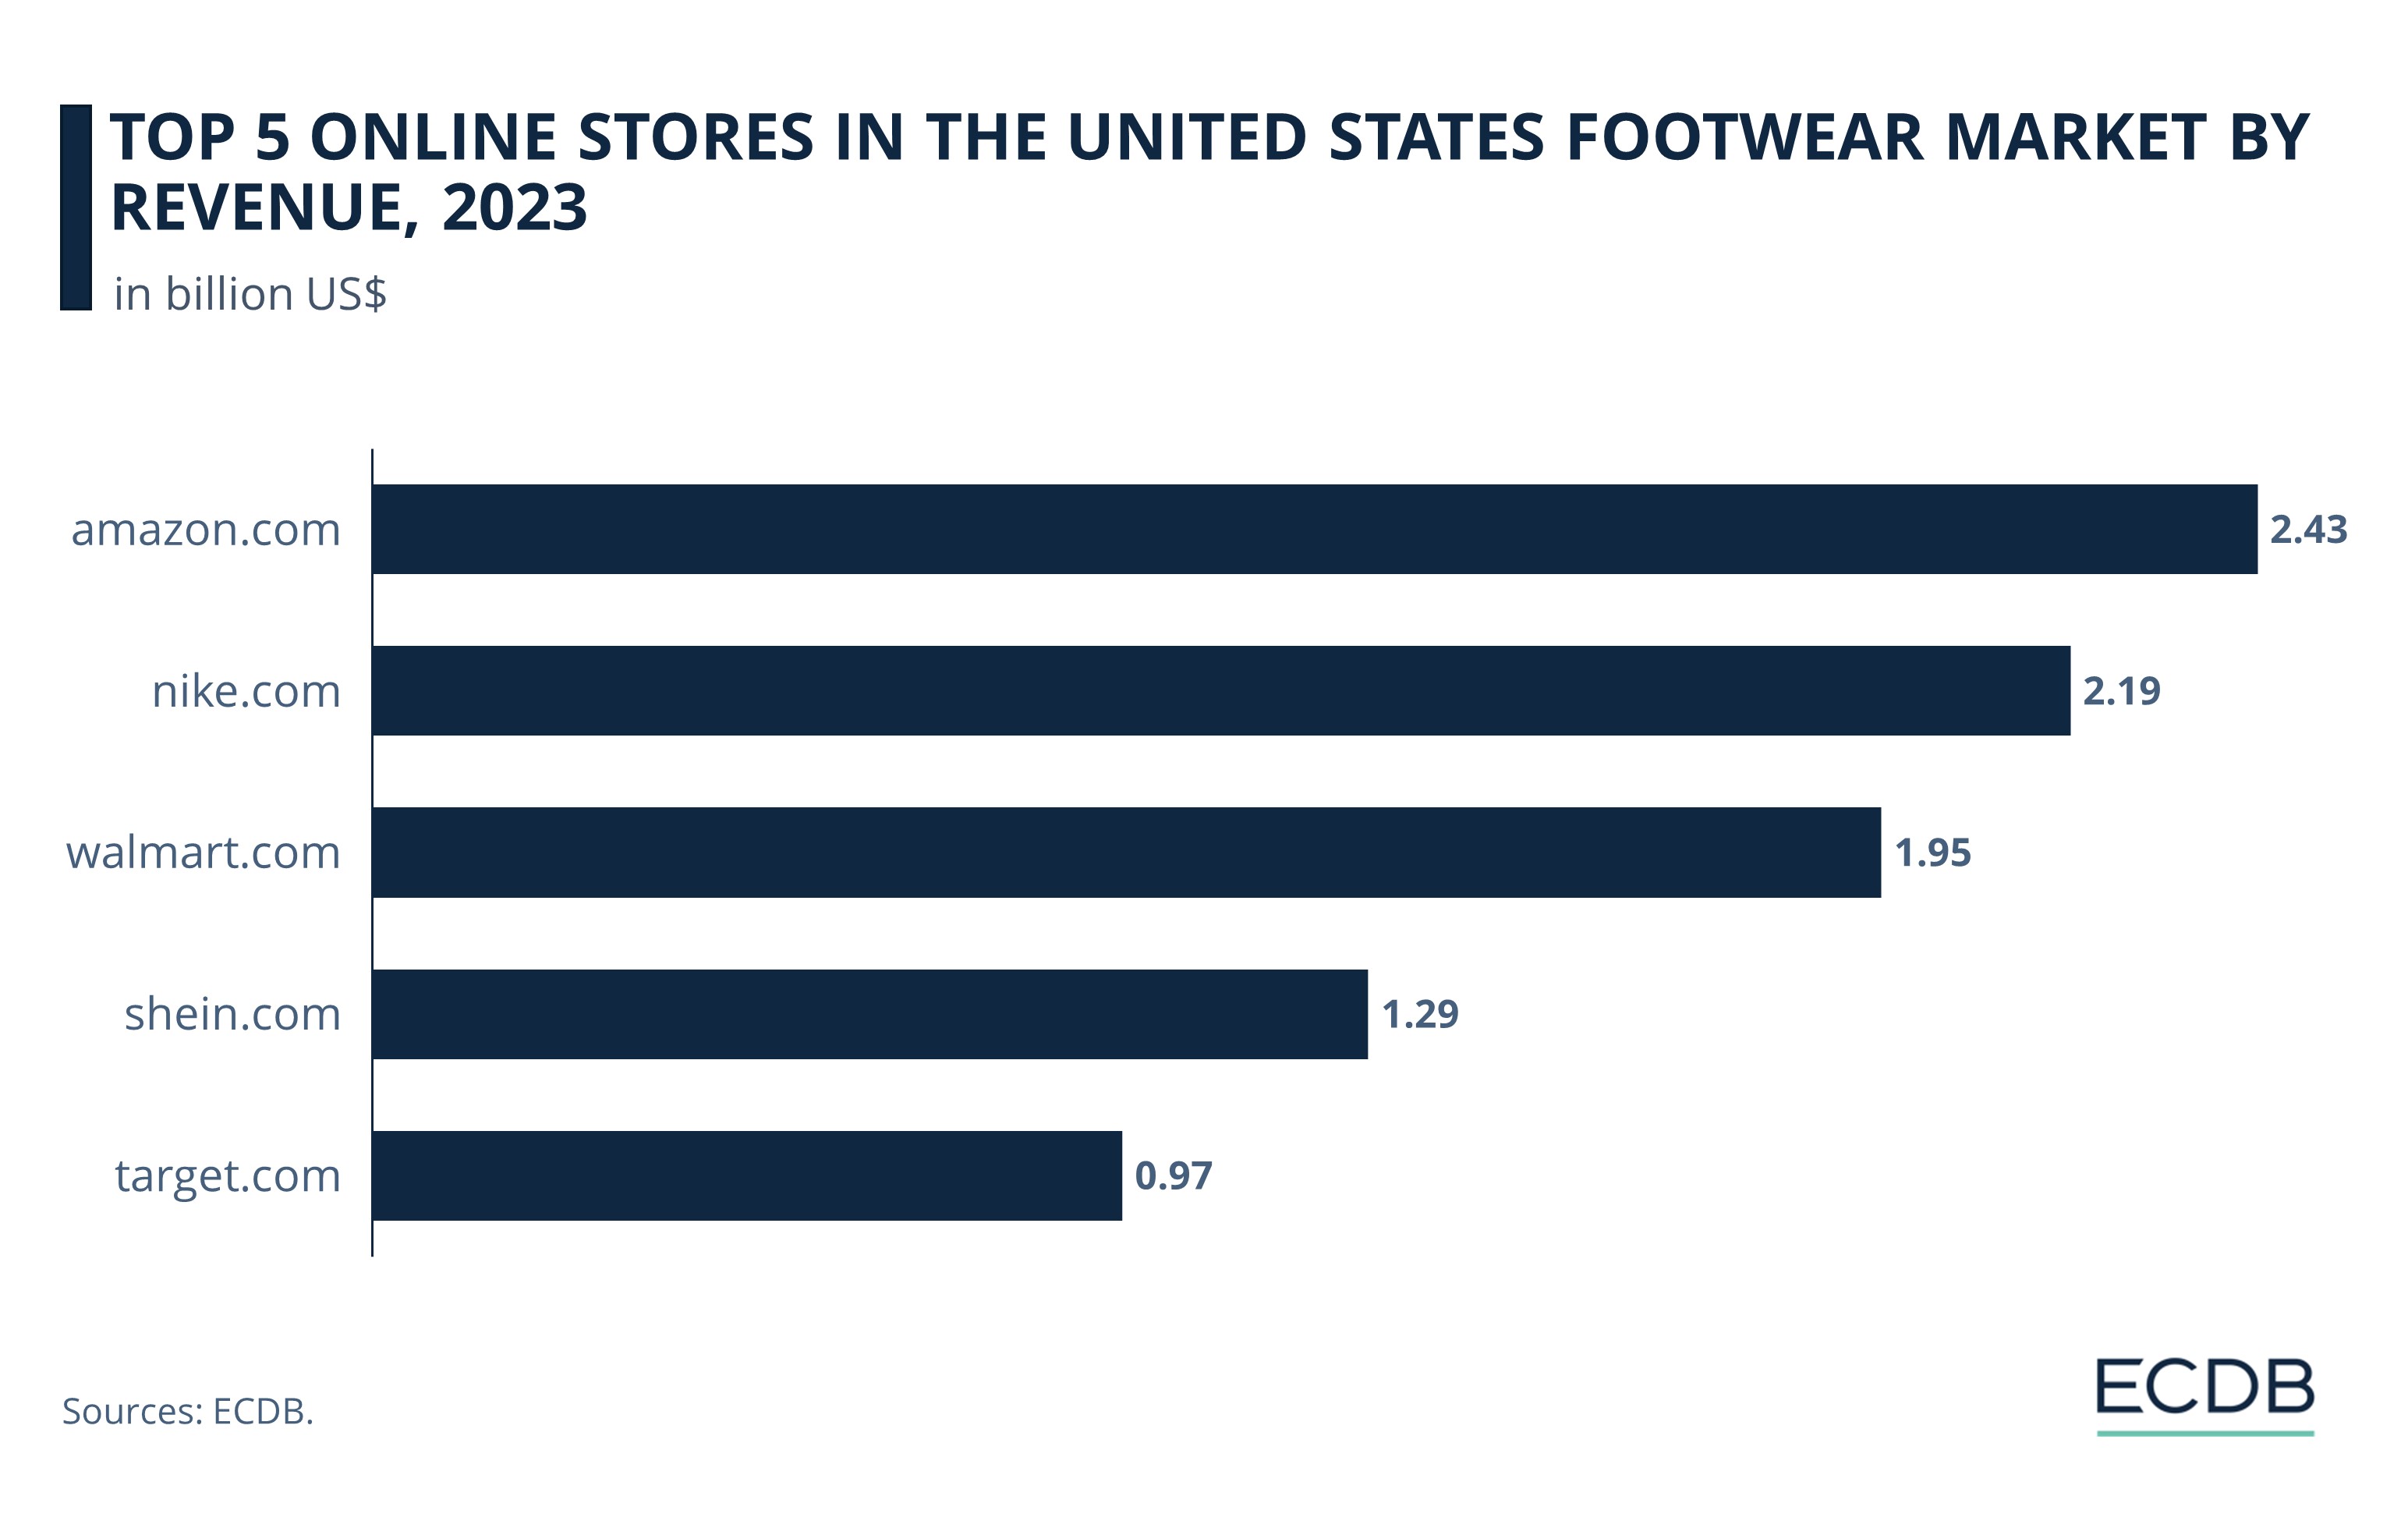 Top 5 Onlıne Stores In The Unıted States Footwear Market By Revenue, 2023